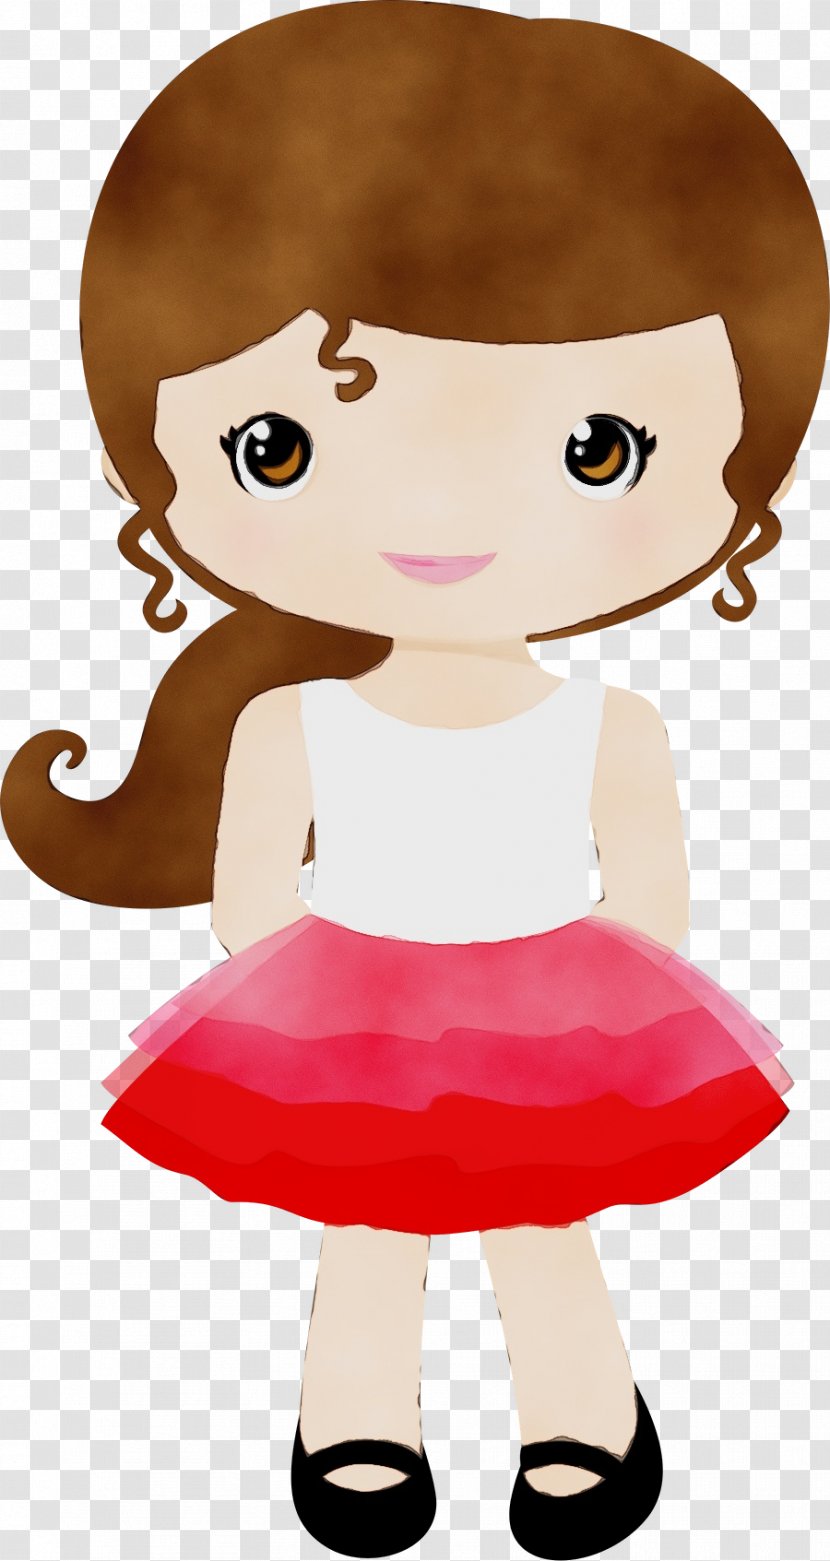 Hair Style - Costume - Fictional Character Transparent PNG